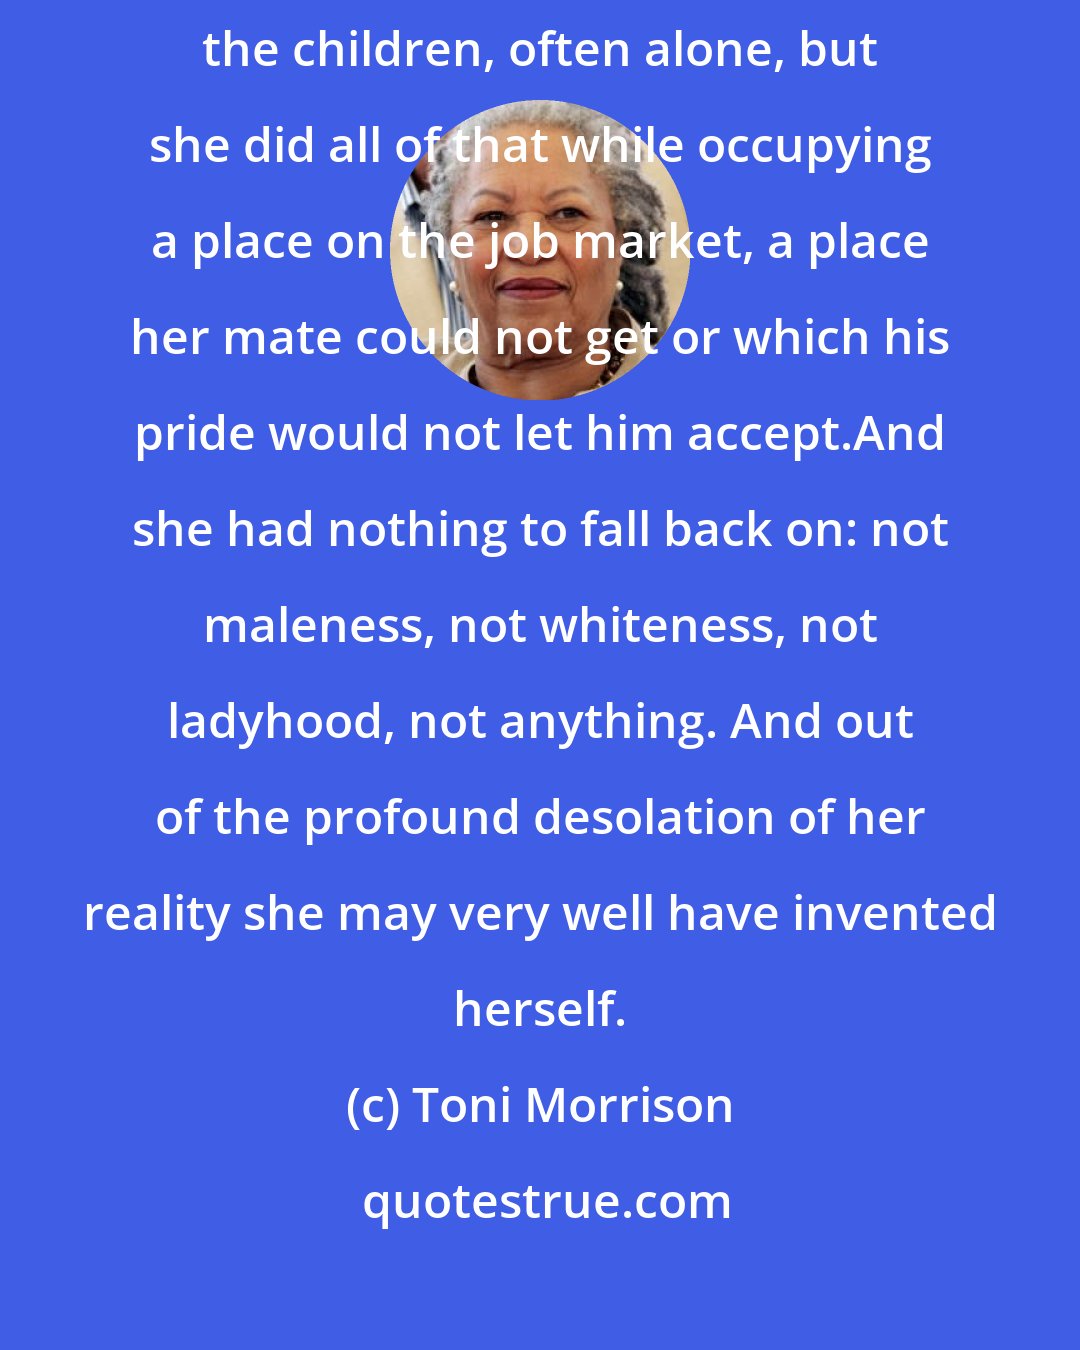 Toni Morrison: True the Black woman did the housework, the drudgery; true, she reared the children, often alone, but she did all of that while occupying a place on the job market, a place her mate could not get or which his pride would not let him accept.And she had nothing to fall back on: not maleness, not whiteness, not ladyhood, not anything. And out of the profound desolation of her reality she may very well have invented herself.